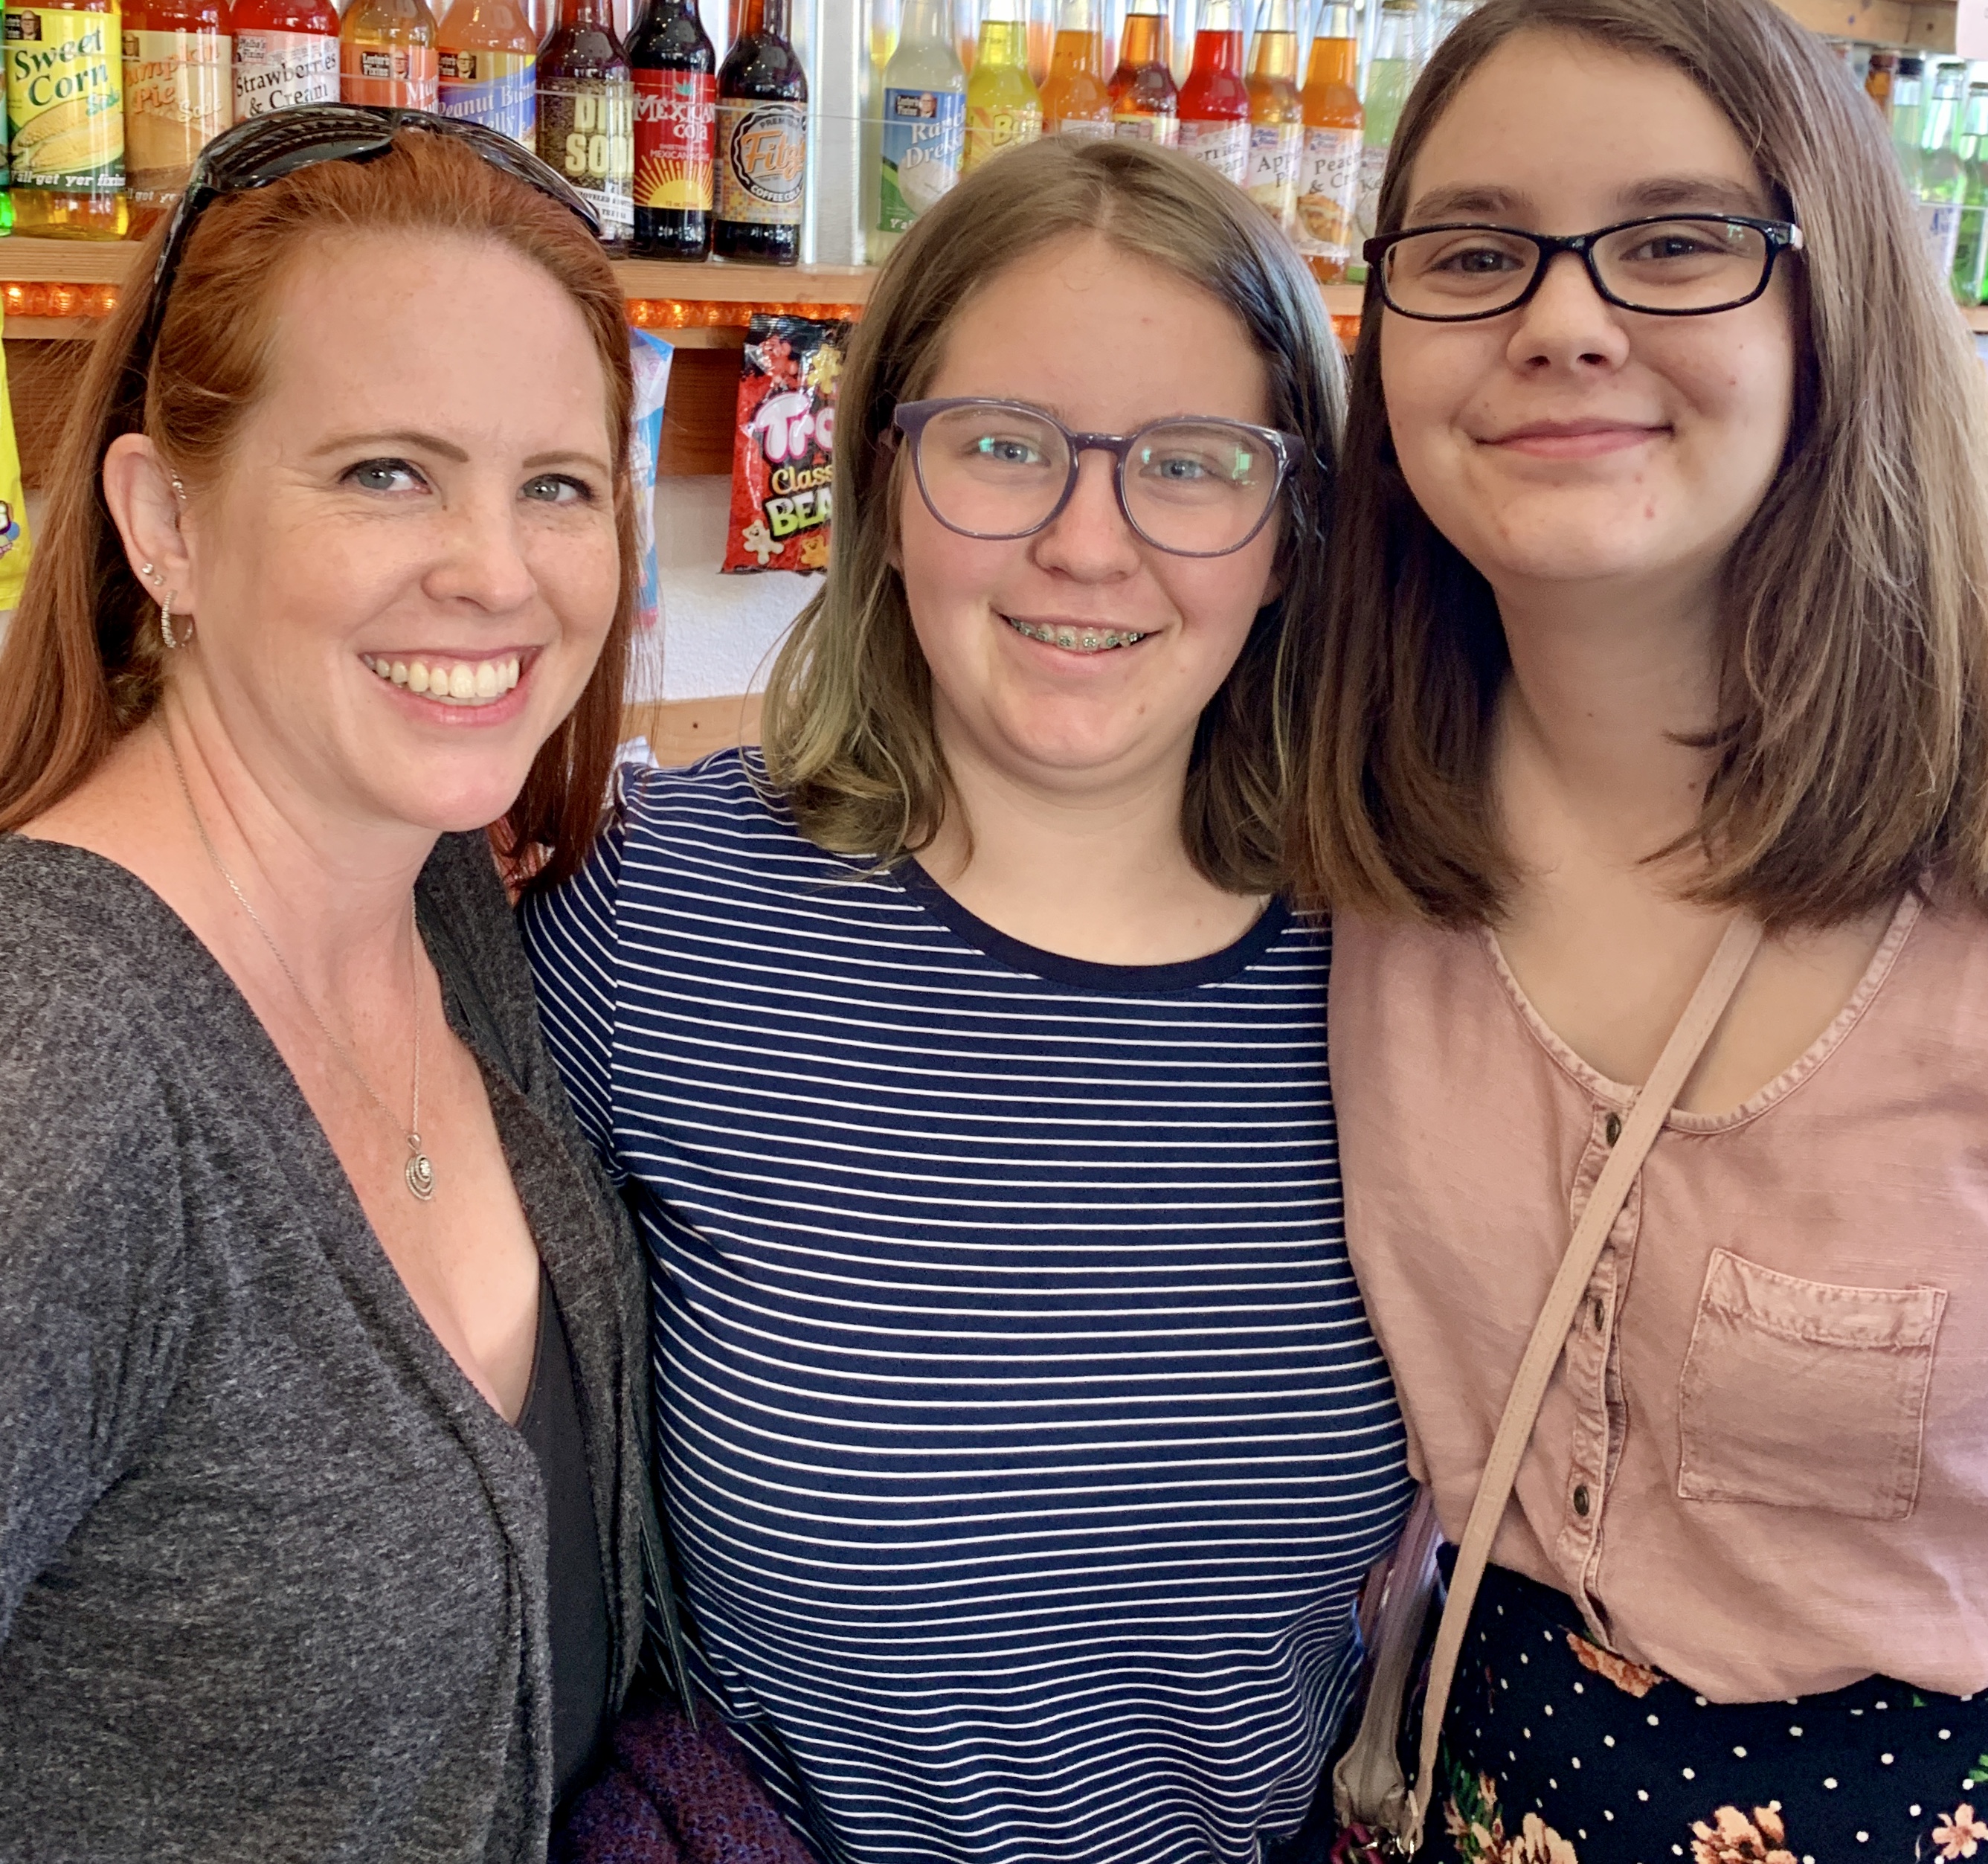 Mom and daughters in soda shop